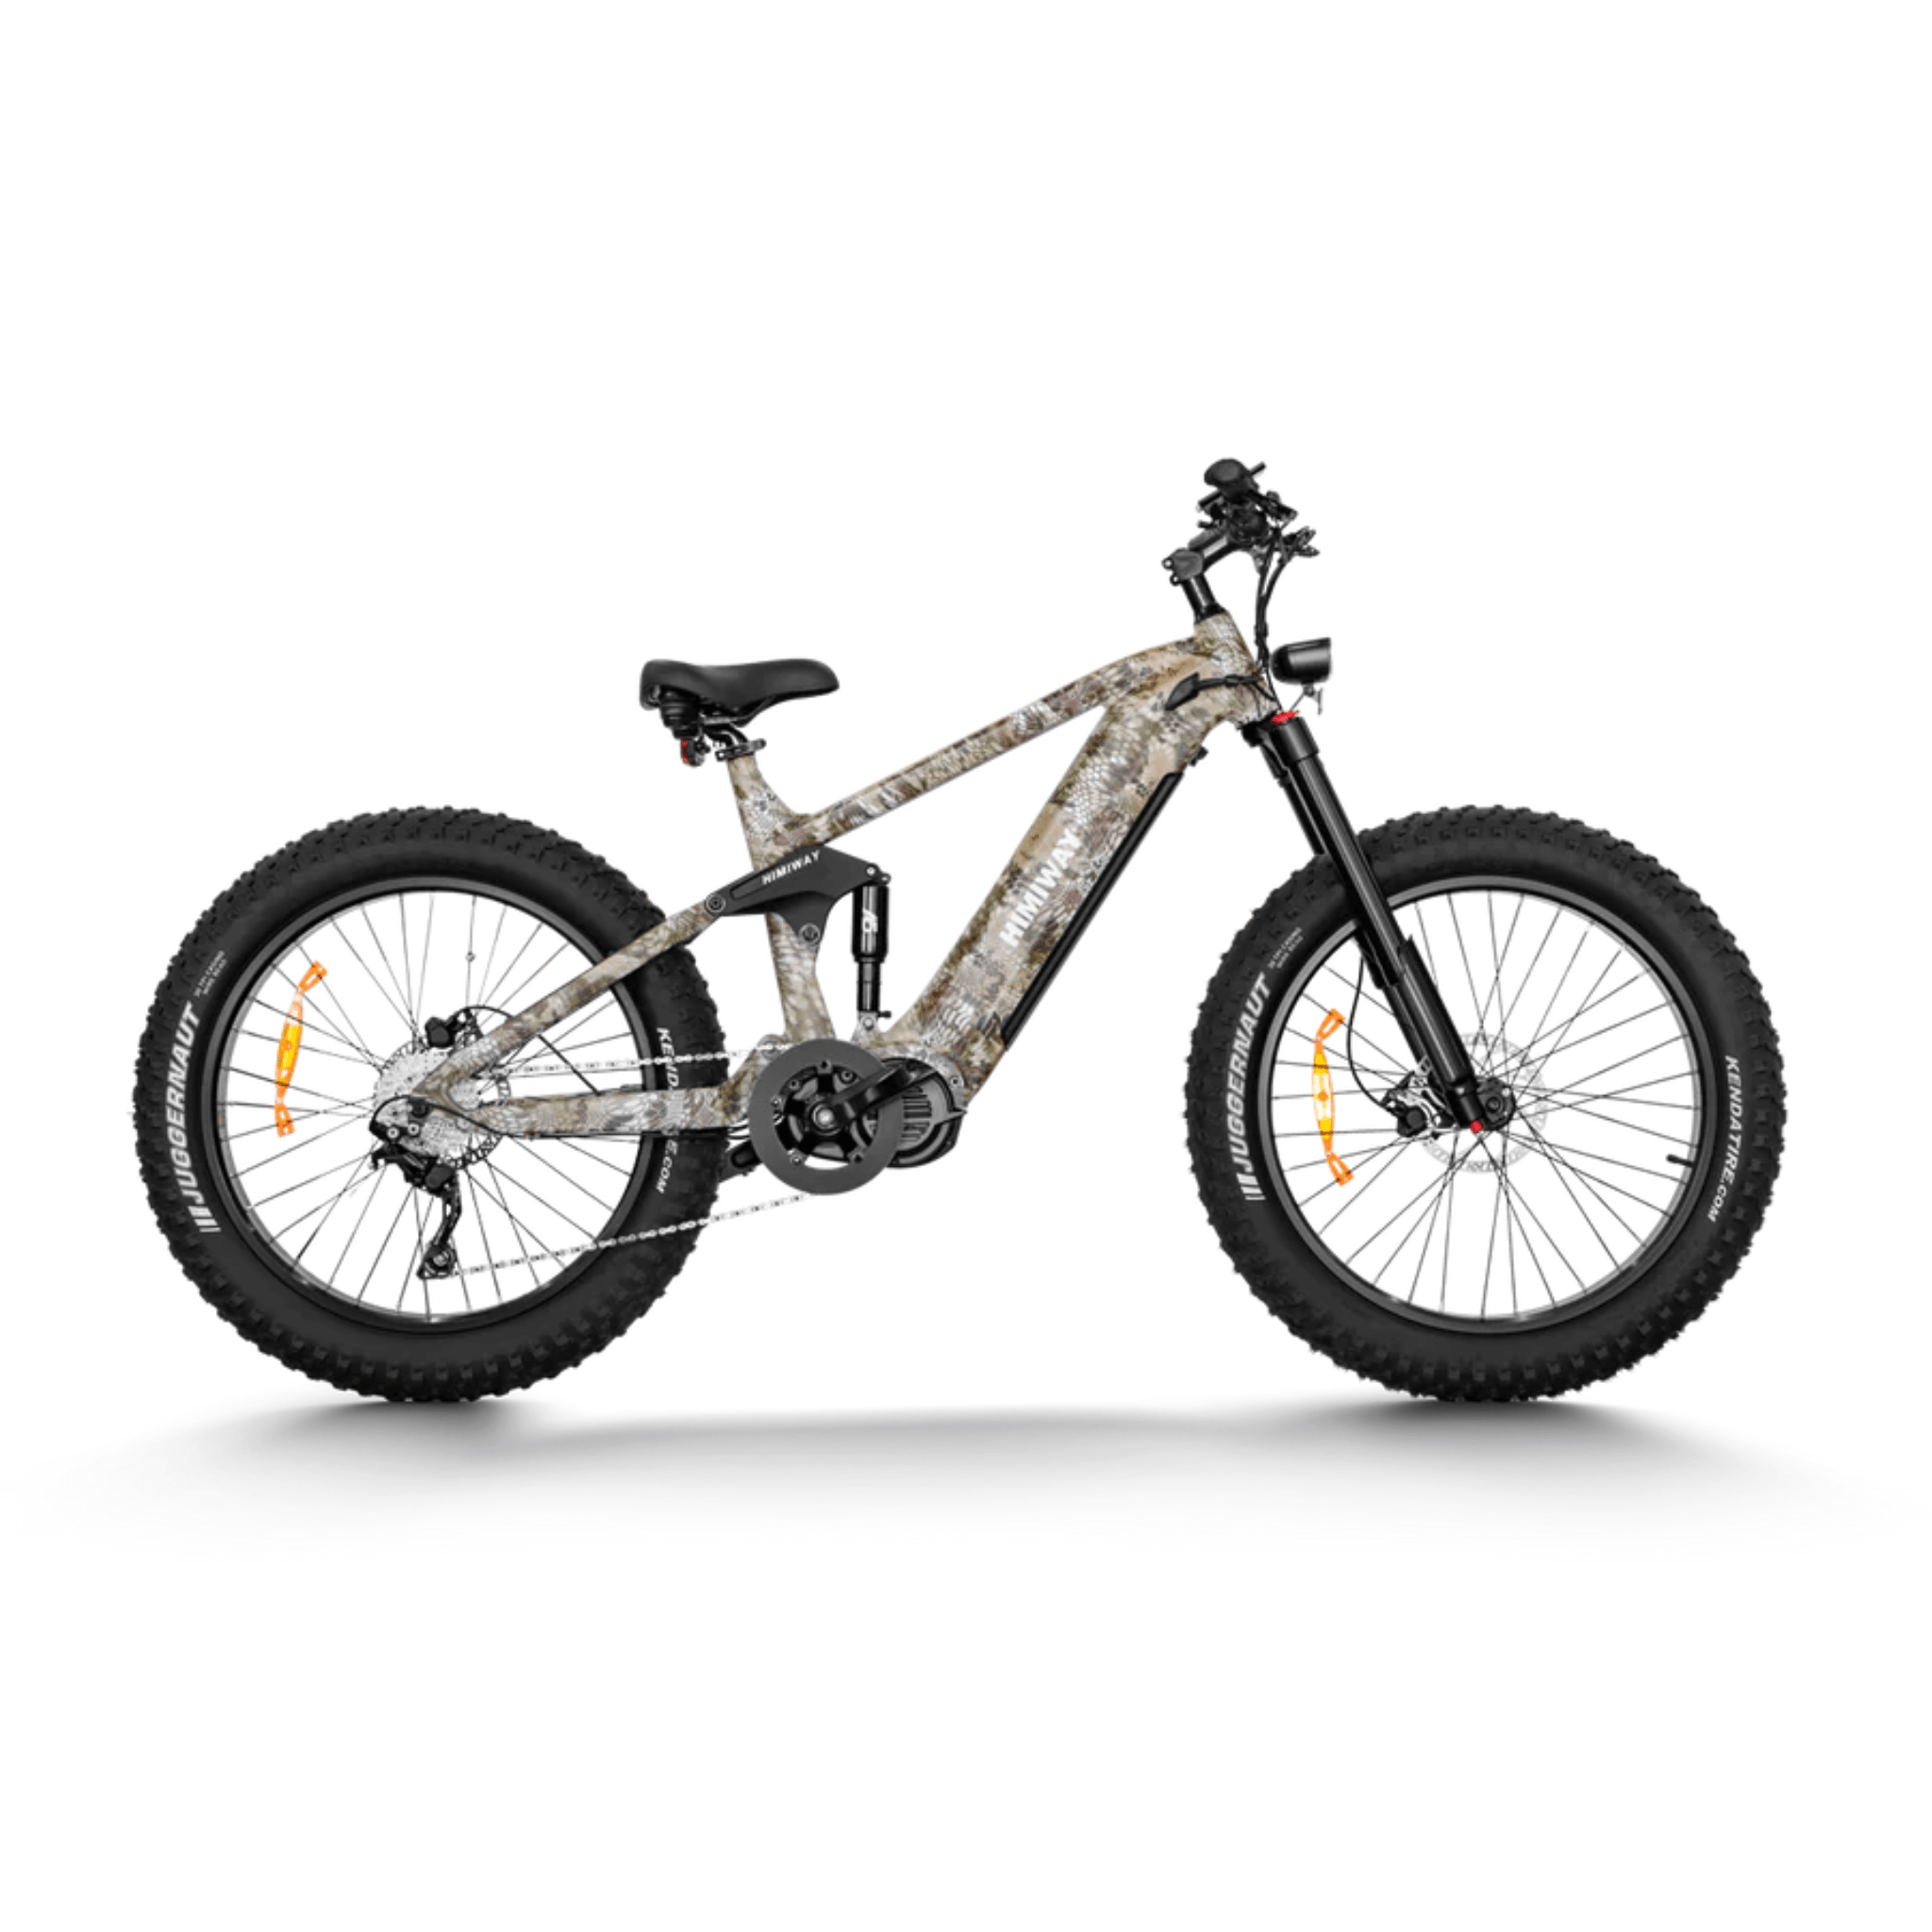 Himiway Escape pro, Dual Suspension and fat tires